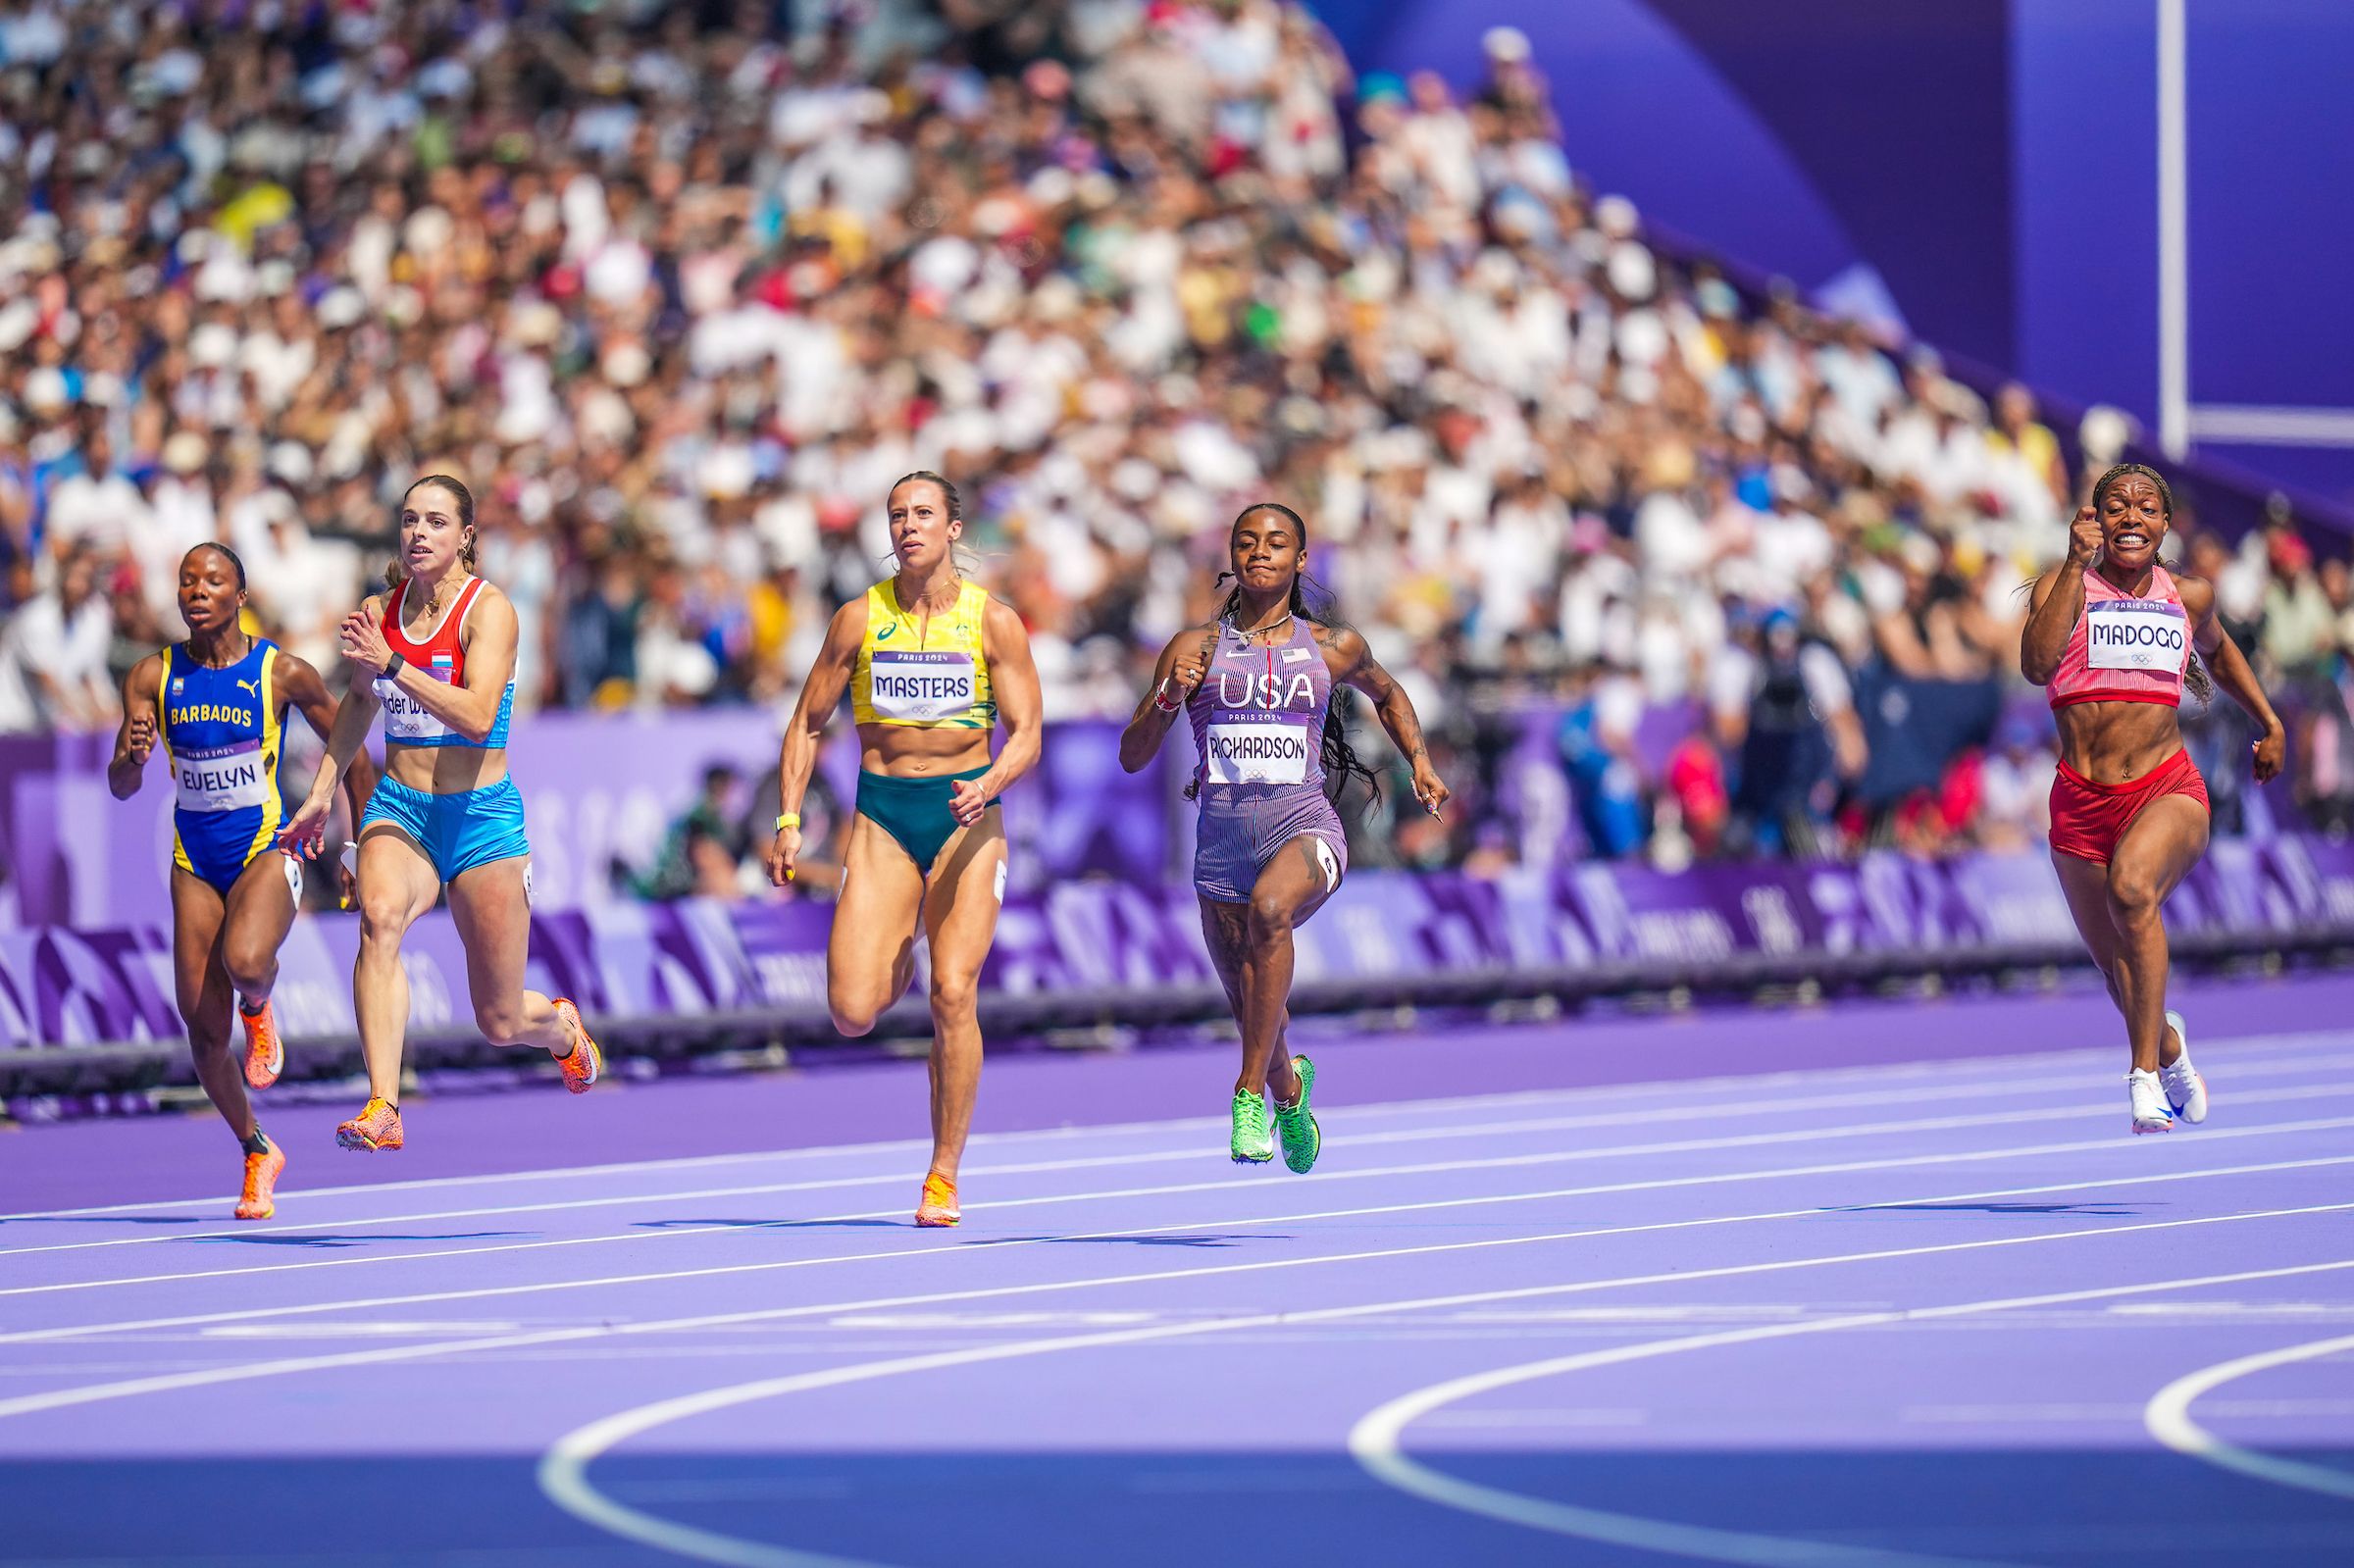 The women's 100m heats at the Paris 2024 Olympic Games